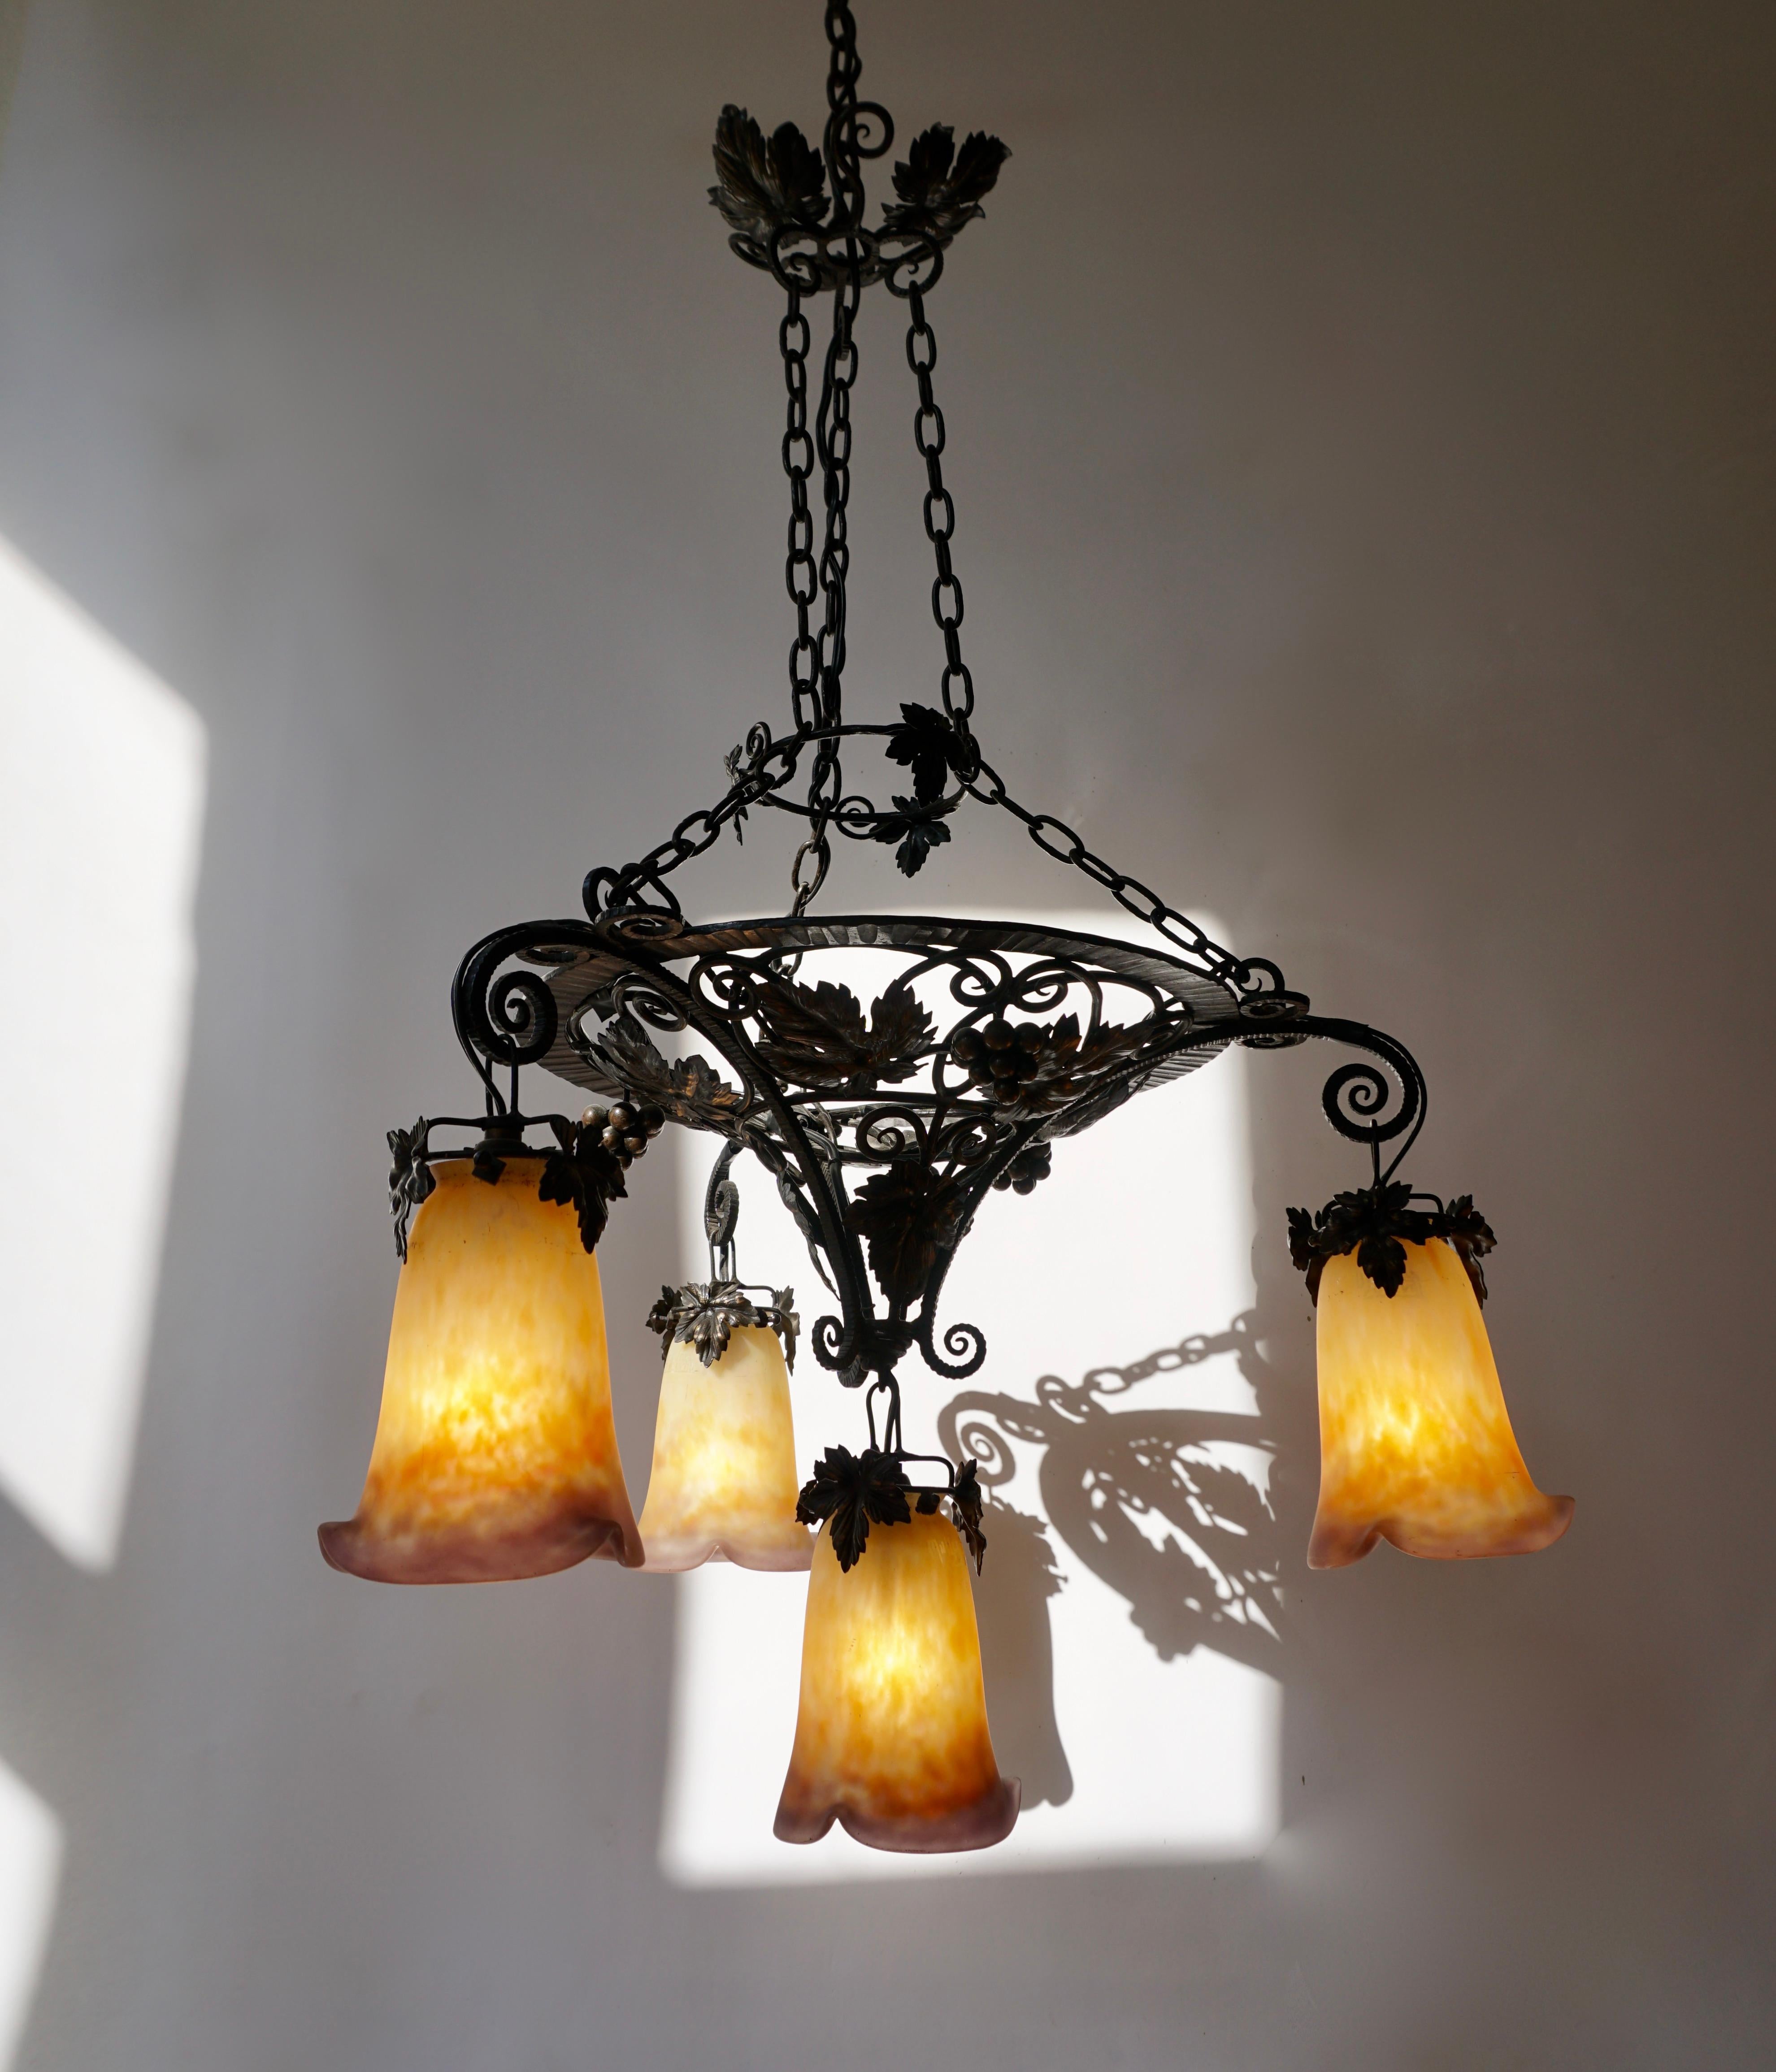 This sensational early French Art Deco chandelier was designed and signed by Muller Frères. It features a black wrought iron base with stylized floral and chain detailing. It has four frosted glass 